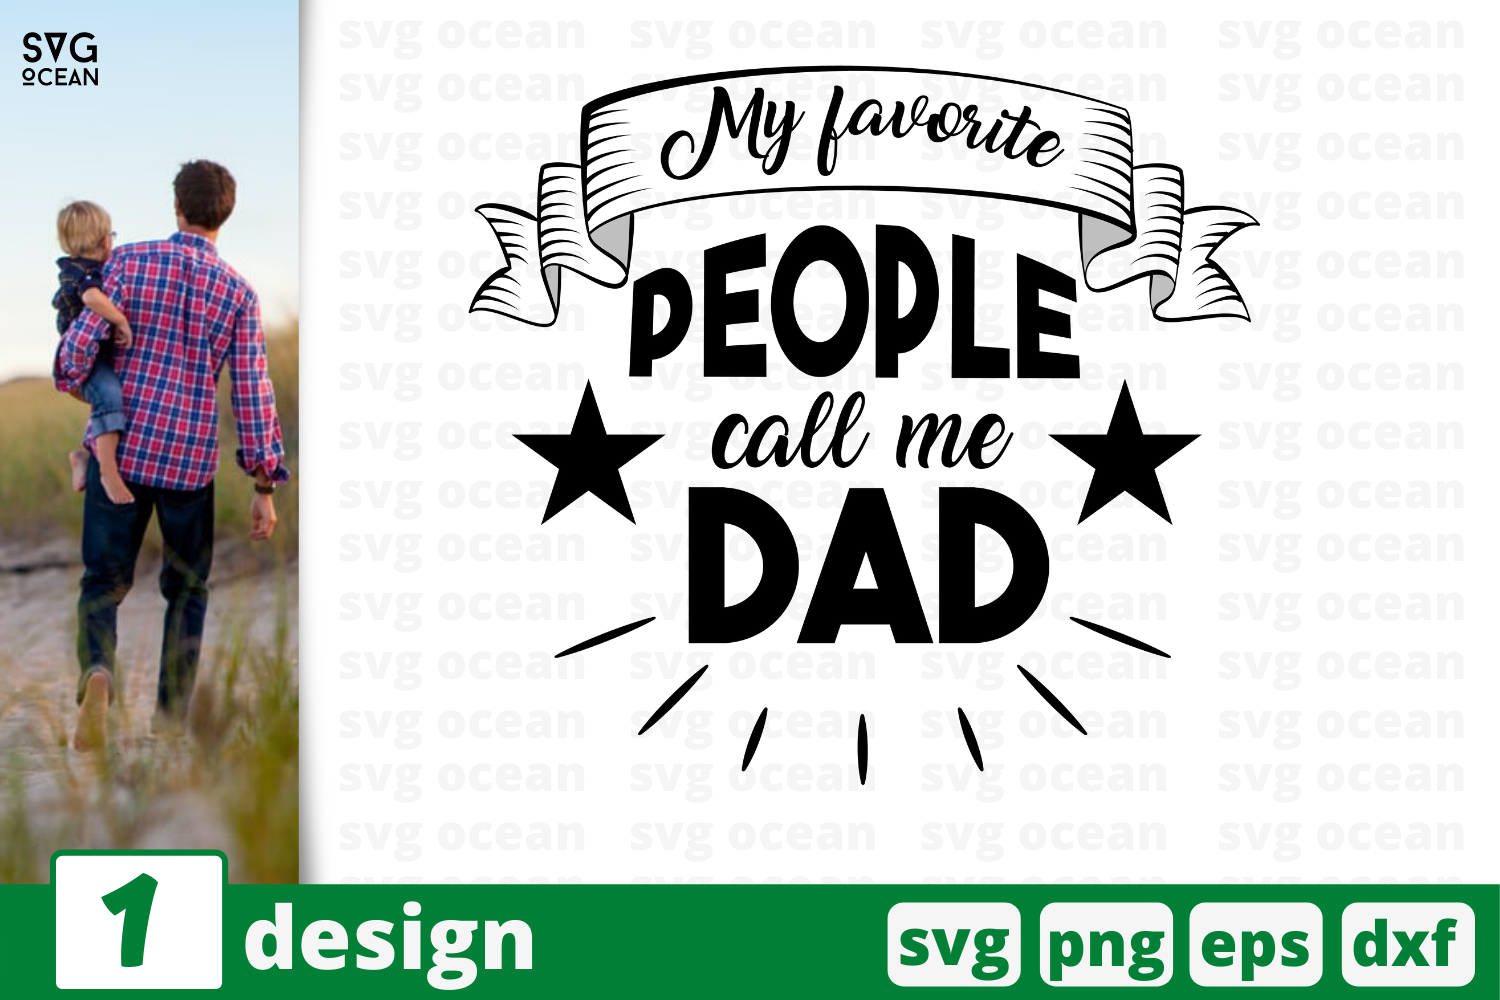 Download Kids Who Call Me Dad Svg Fathers Day Svg Fathers Day Quote Svg Dad Svg Kids Svg Arrow Svg Heart Svg Silhouette Svg Cricut Svg Eps Jpg Dxf Templates Materials Deshpandefoundationindia Org